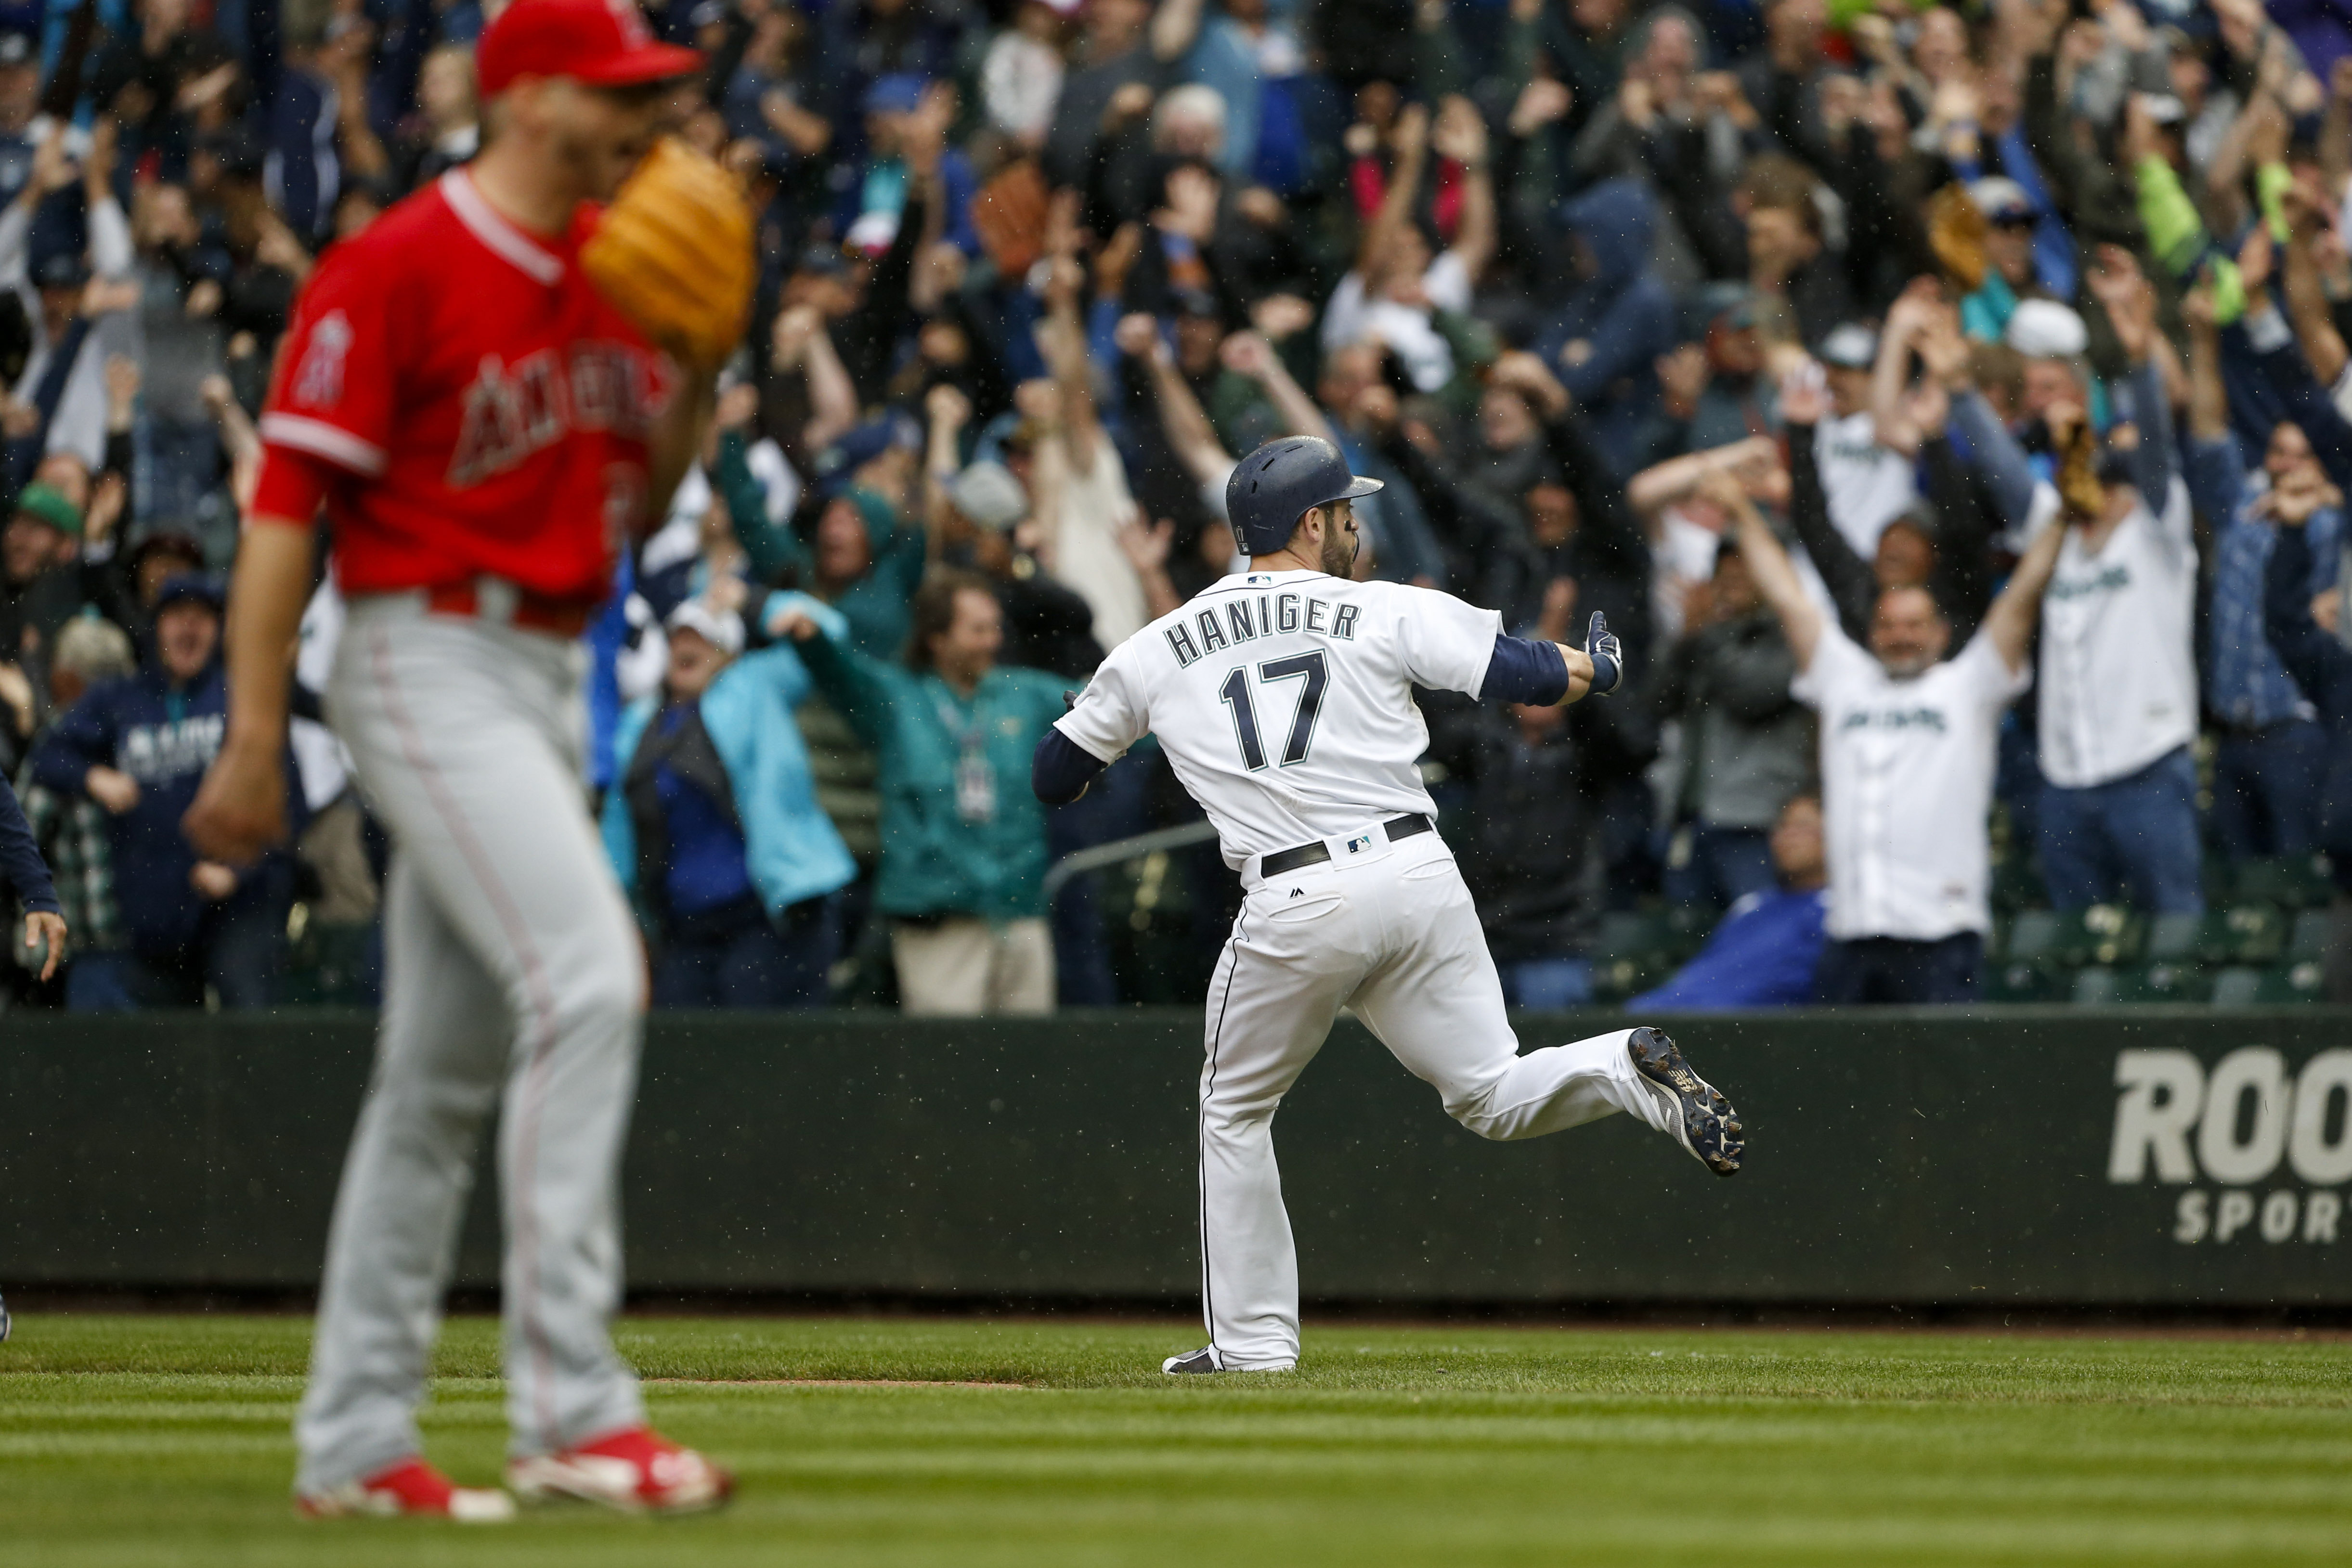 Walk-off home run sweeps Angels off their feet in Seattle